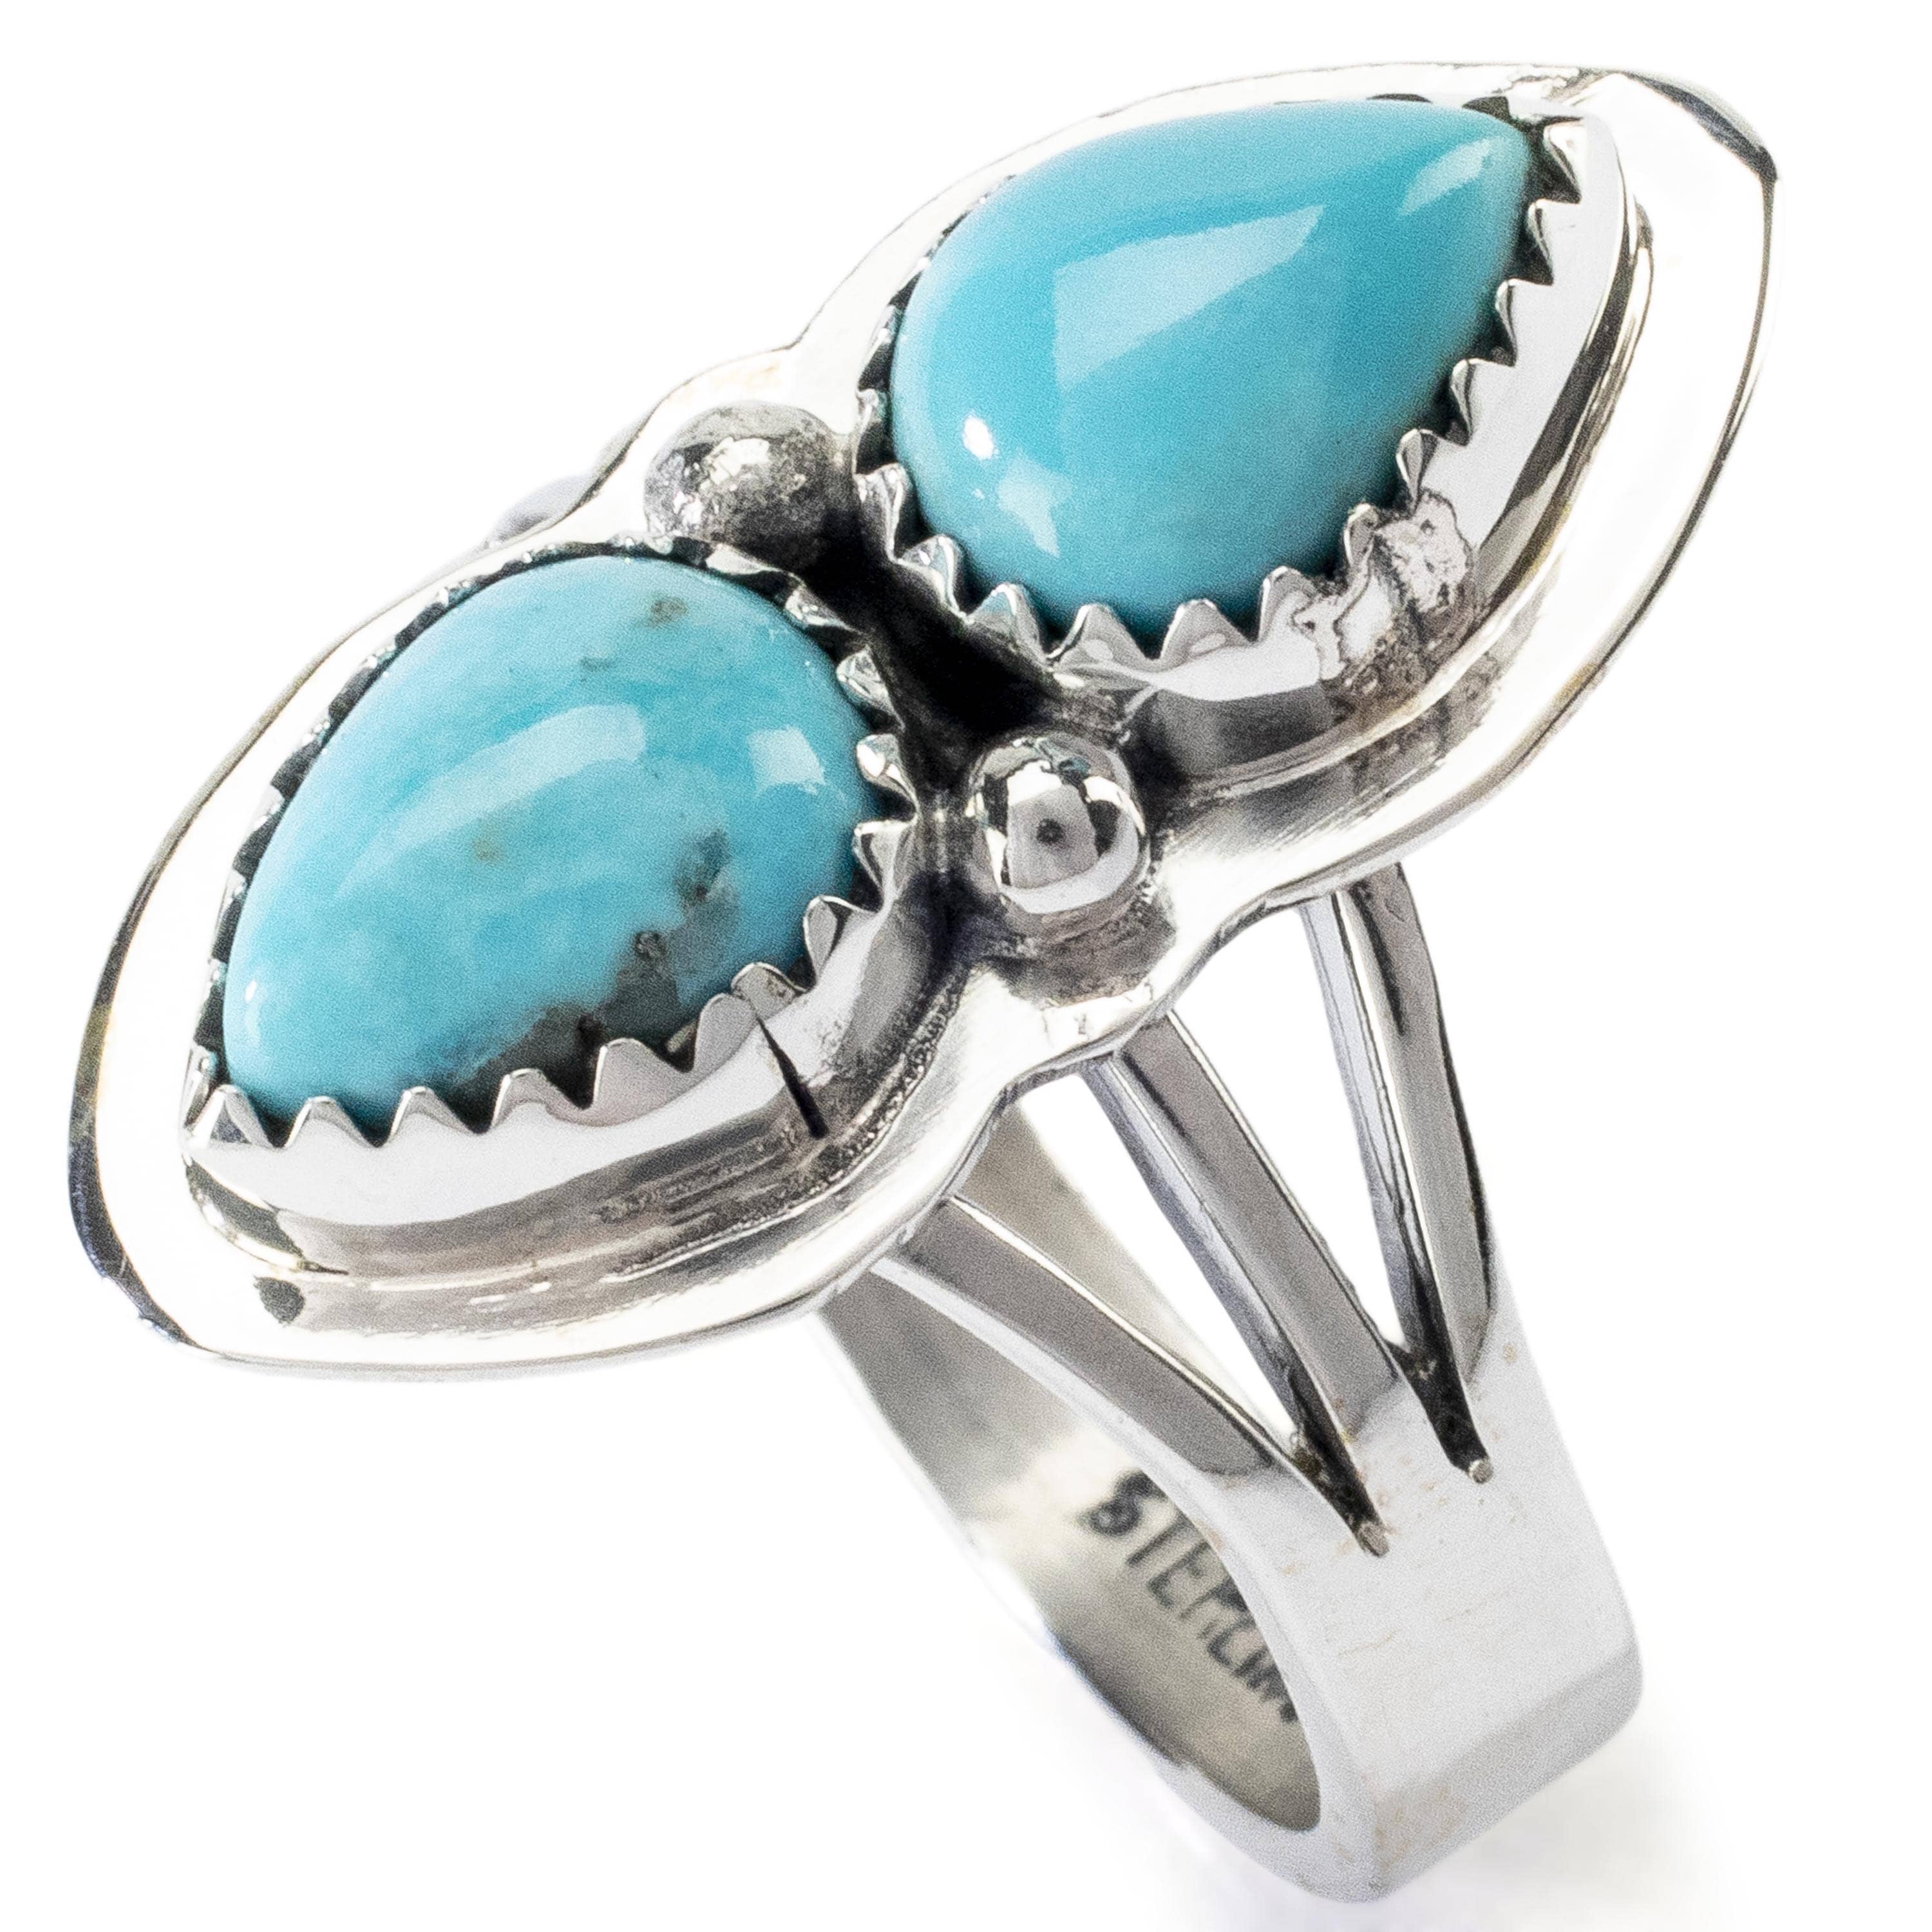 Kalifano Native American Jewelry Double Teardrop King Manassa Turquoise USA Handmade 925 Sterling Silver Ring